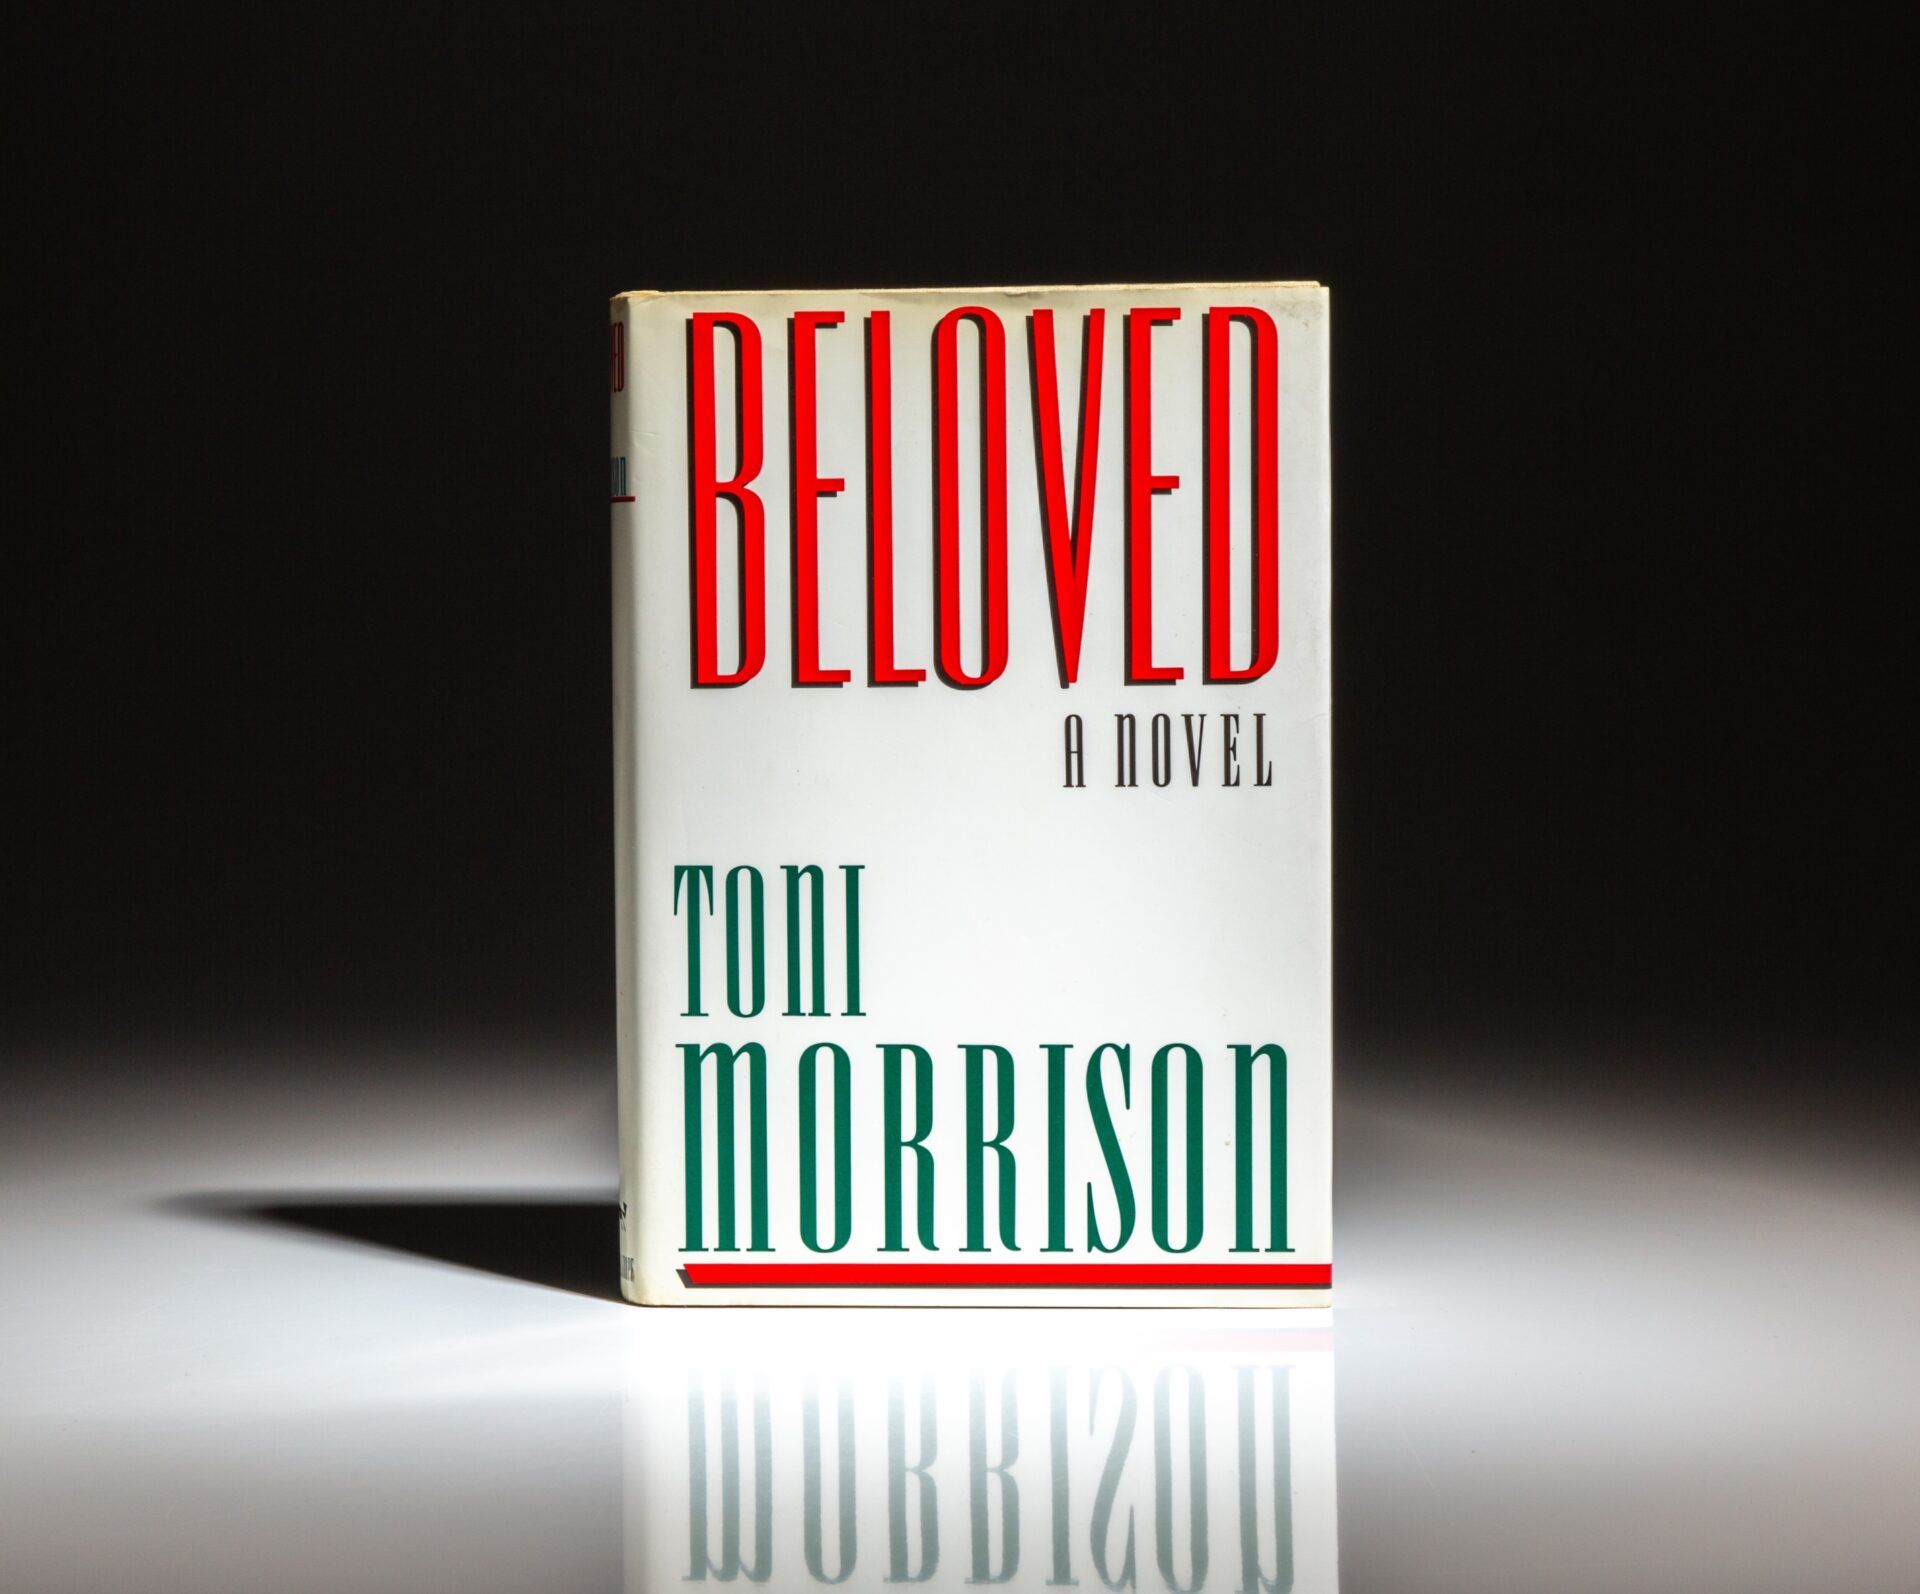 19-astounding-facts-about-beloved-toni-morrison